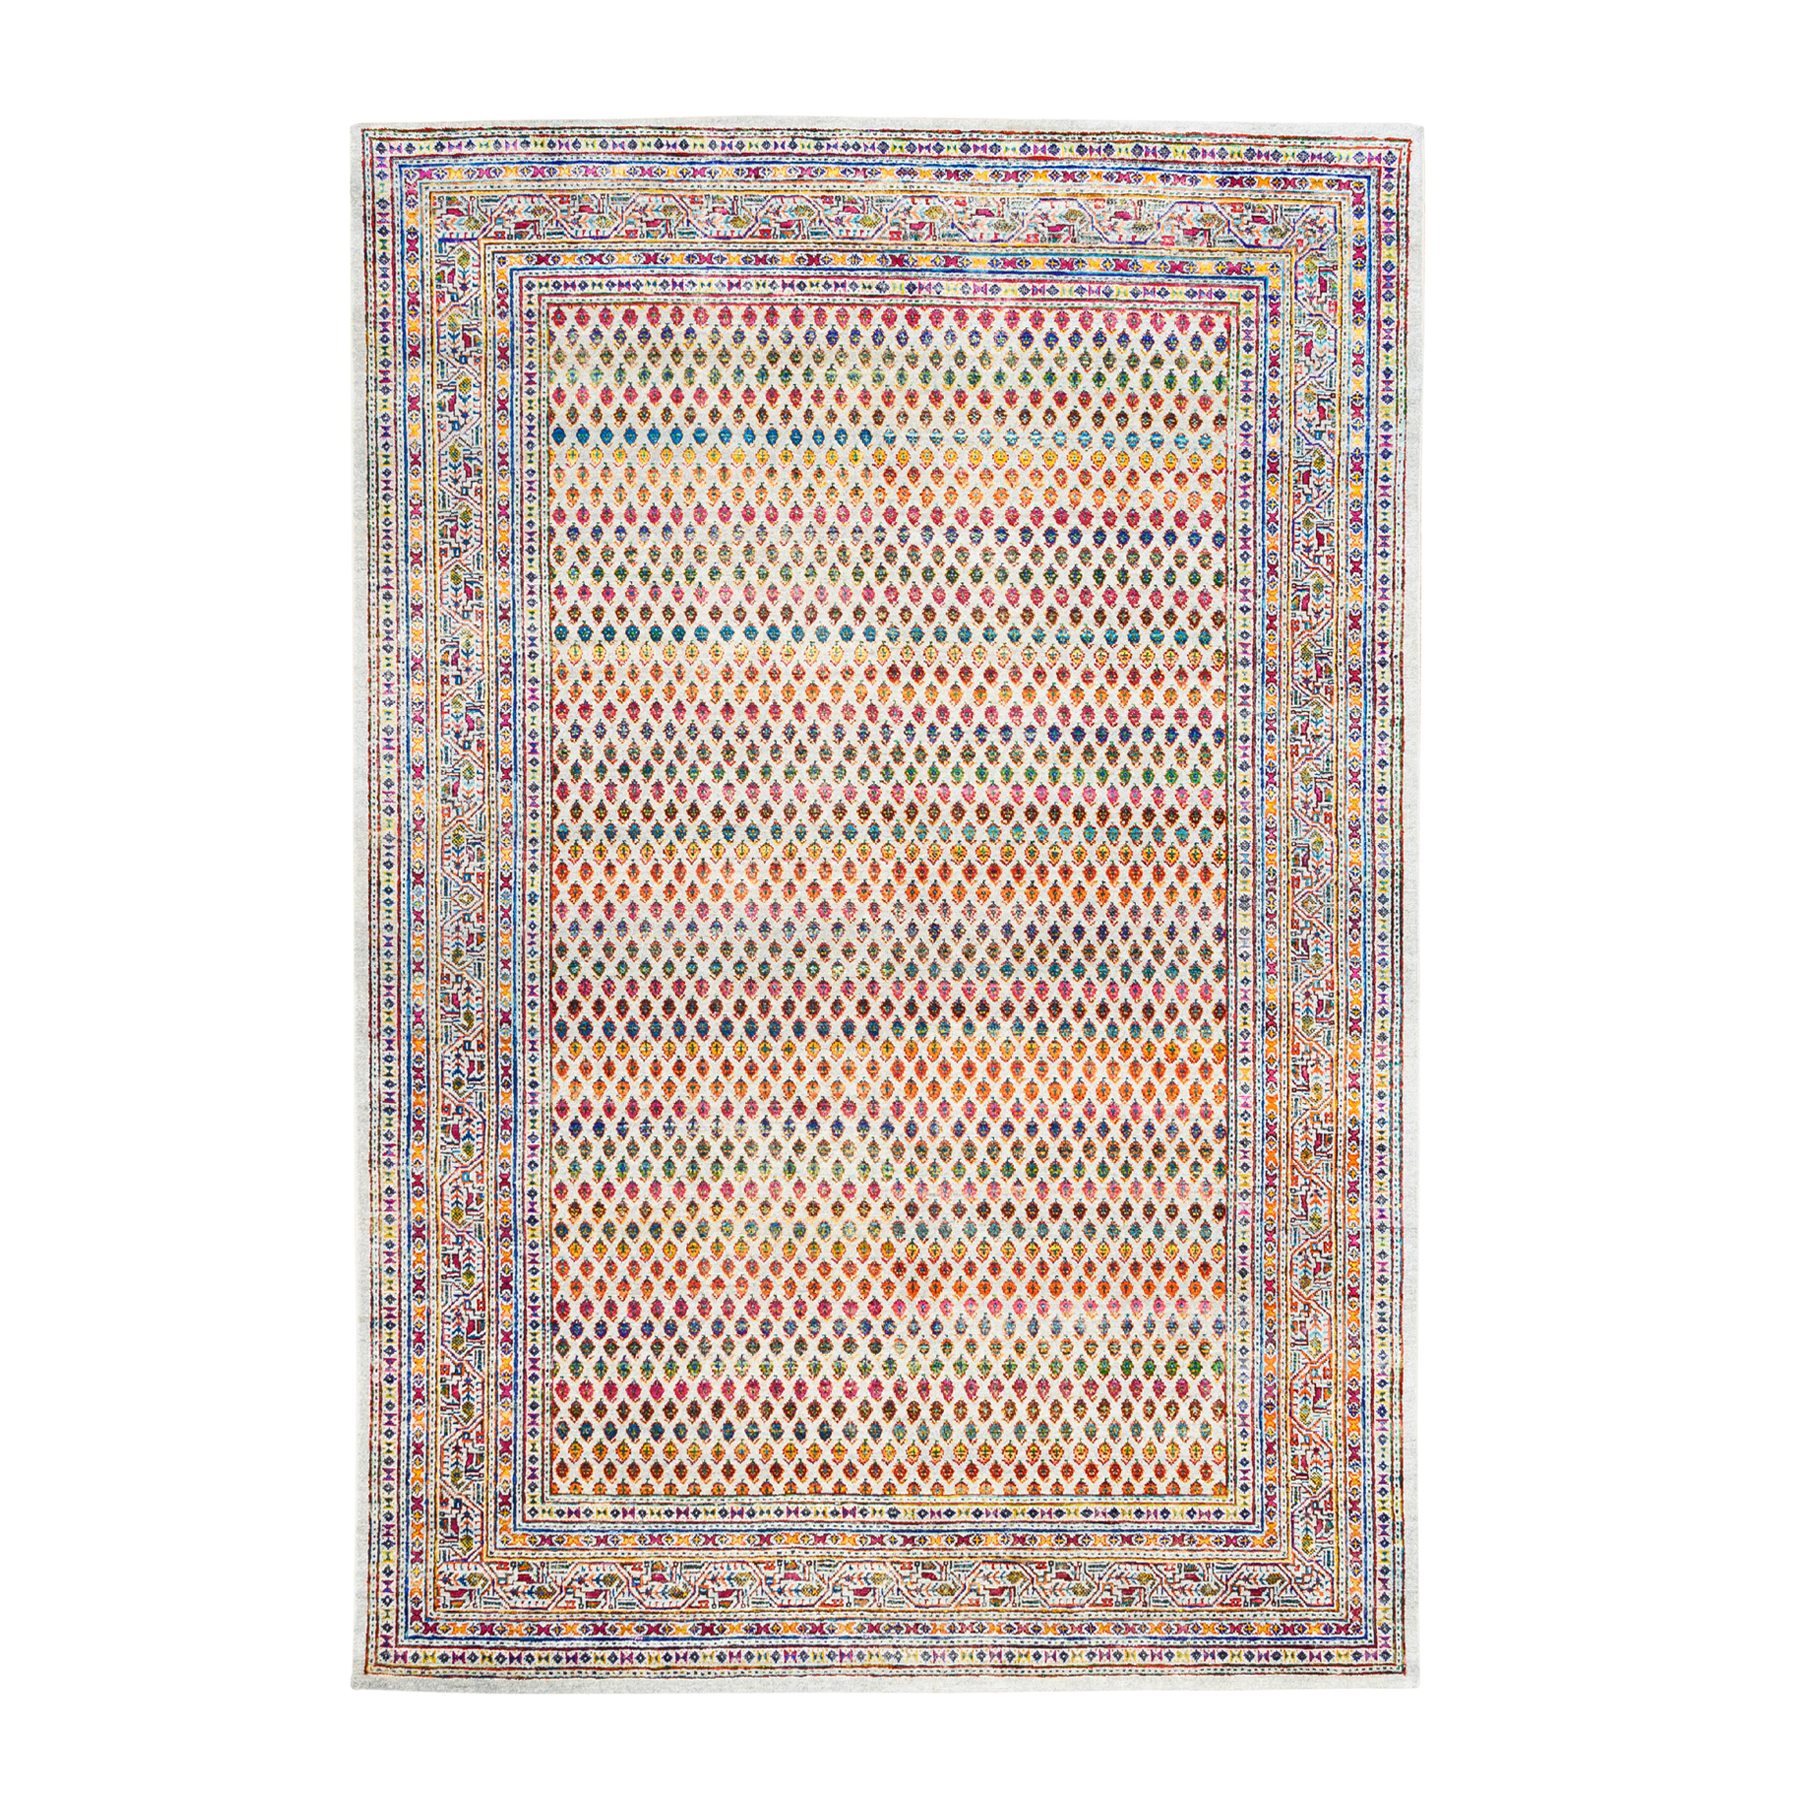 6'2"x9' Colorful Wool And Sari Silk Sarouk Mir Inspired With Small Boteh Design Hand Woven Oriental Rug 